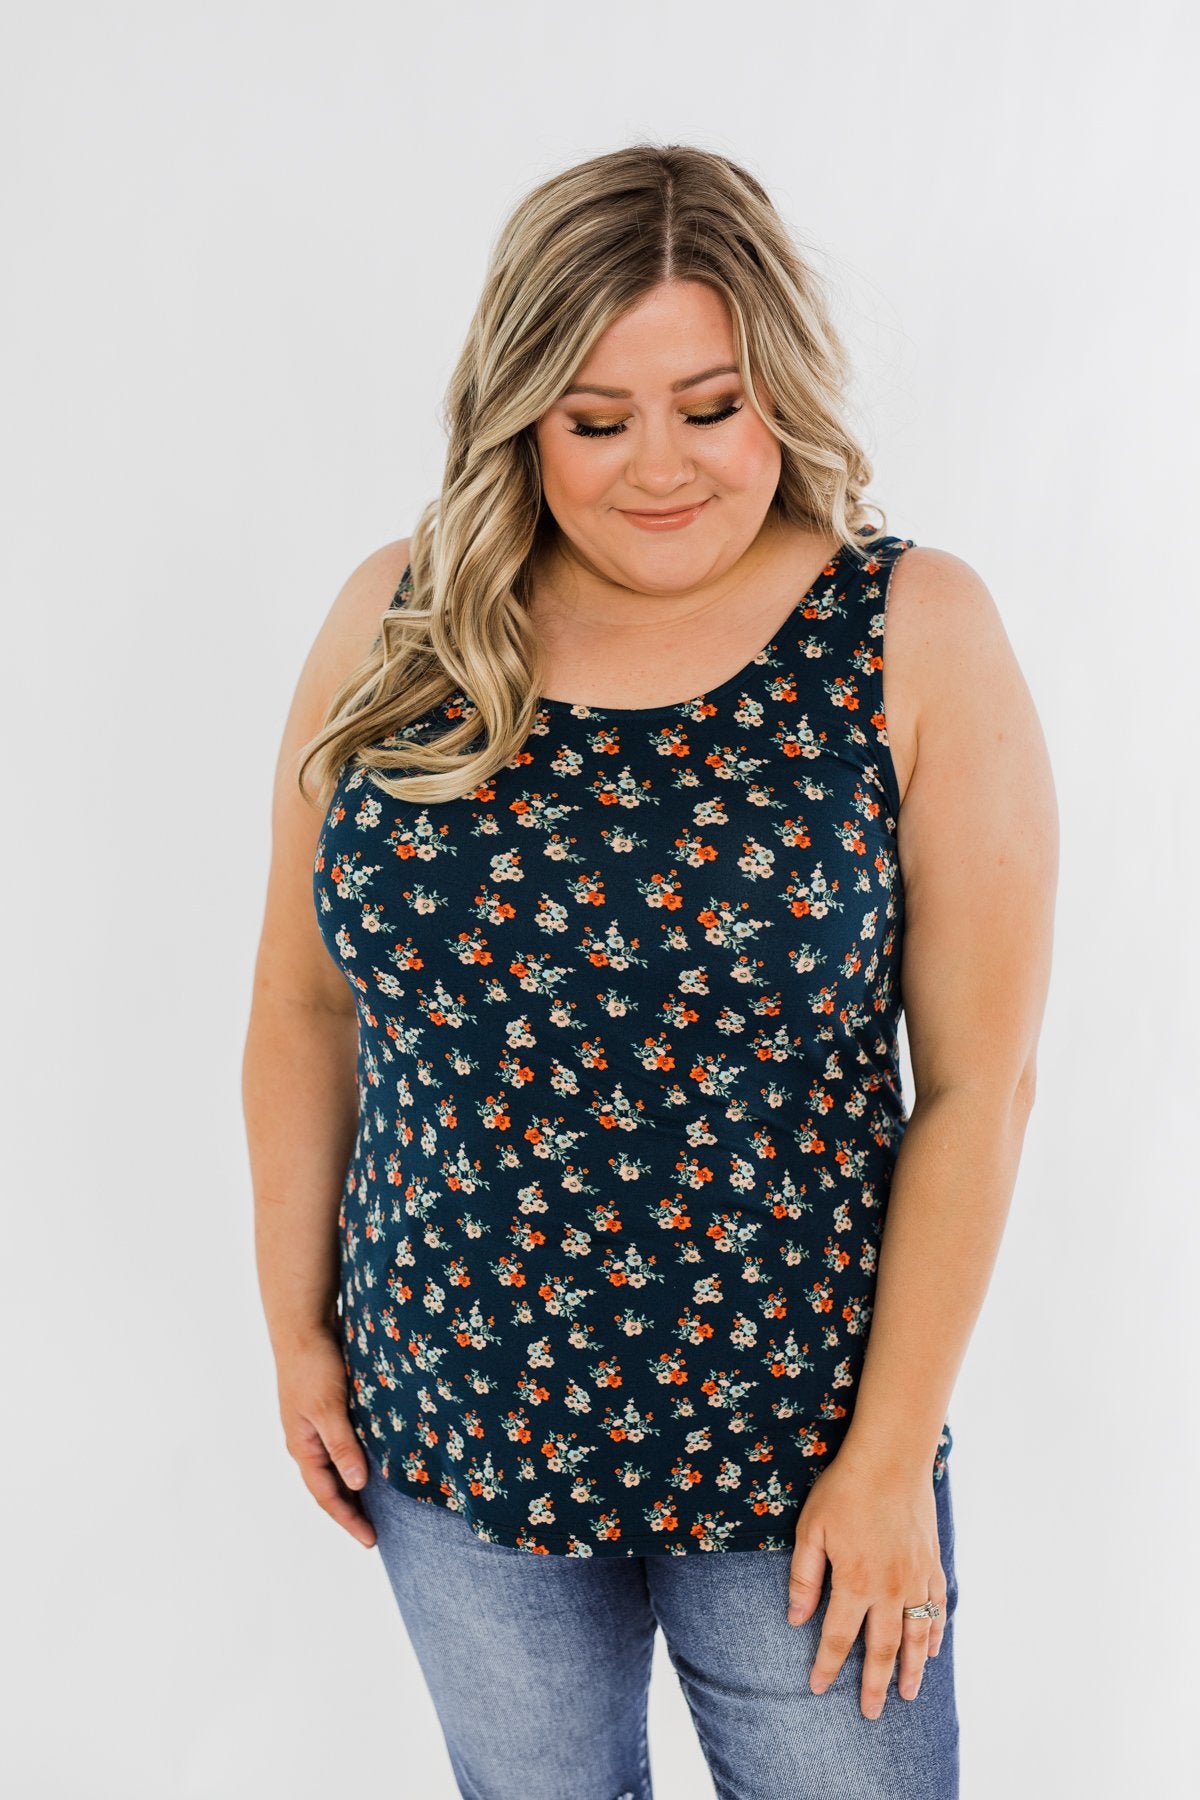 Easily Attracted Floral Tank Top- Dark Teal – The Pulse Boutique